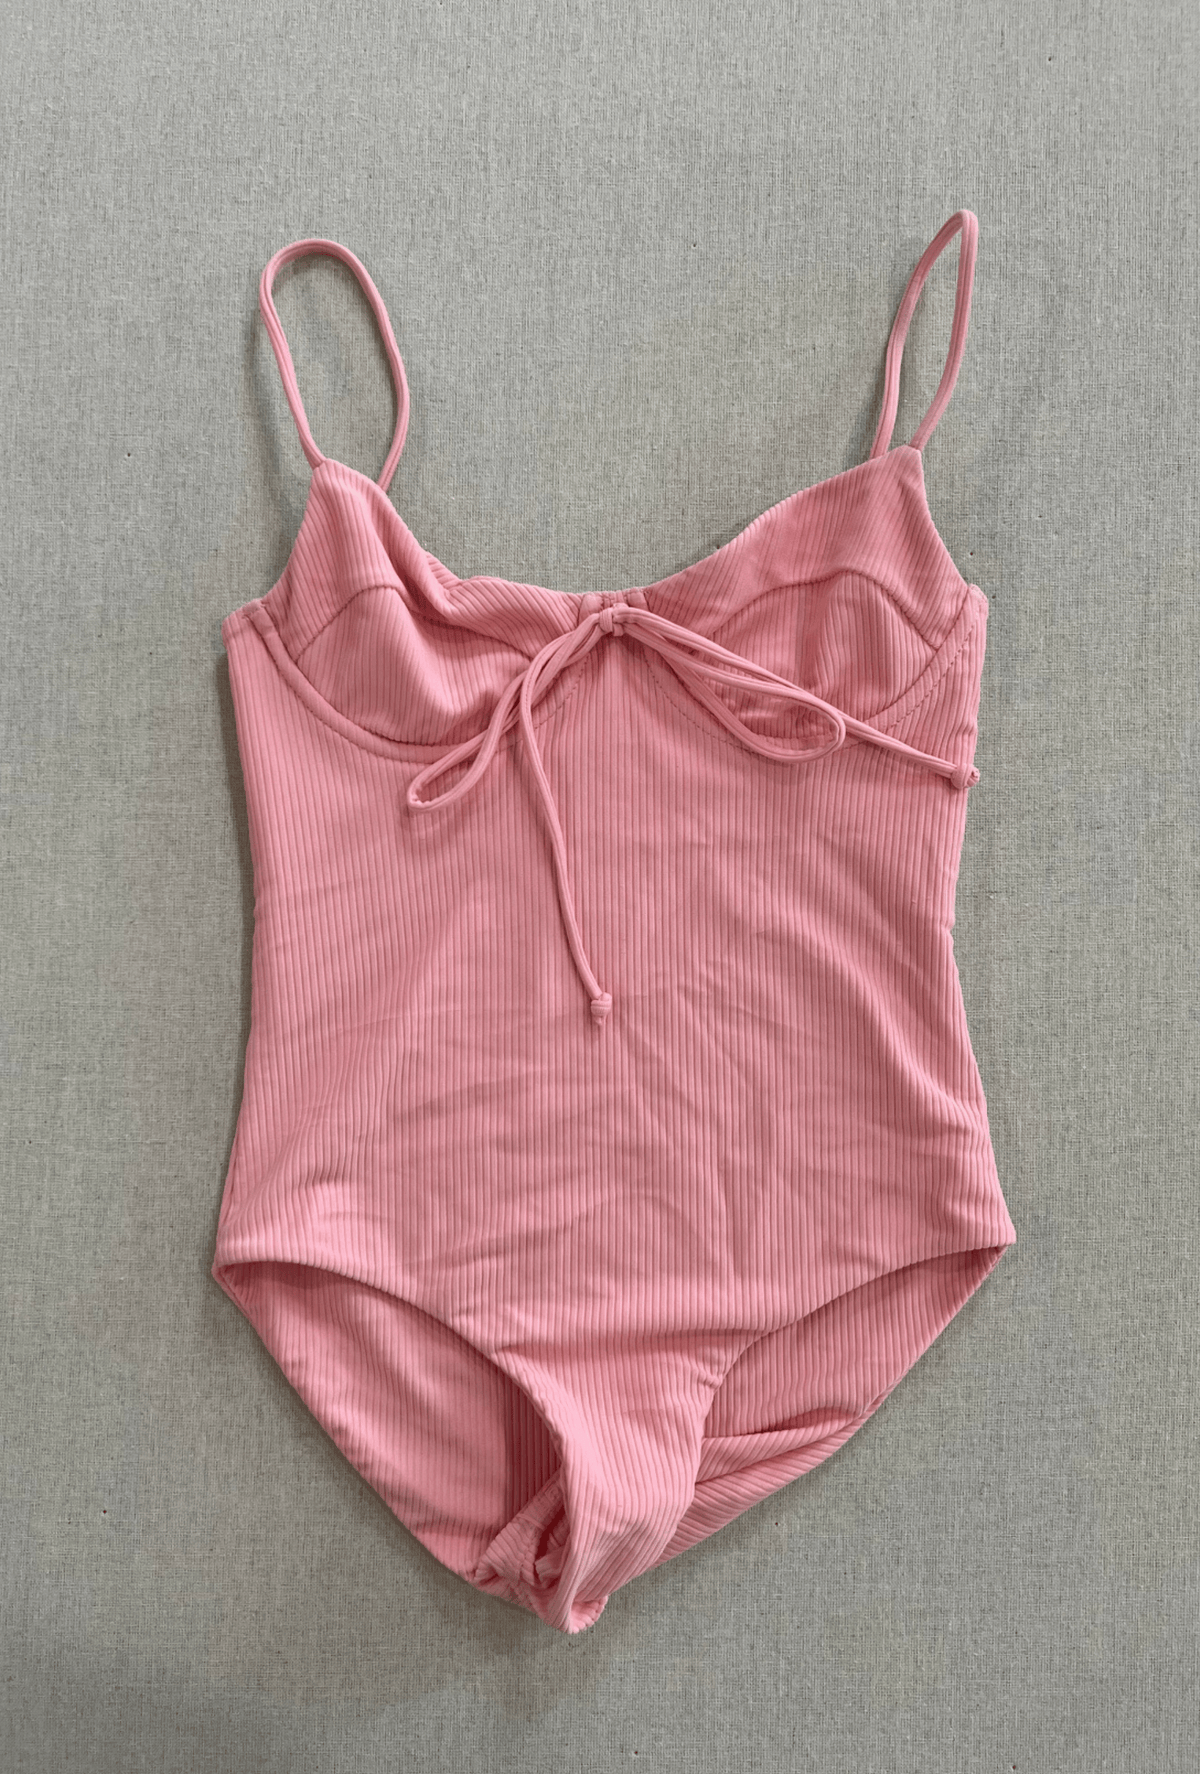 JACKIE SMALL ONE PIECE (SAMPLE)